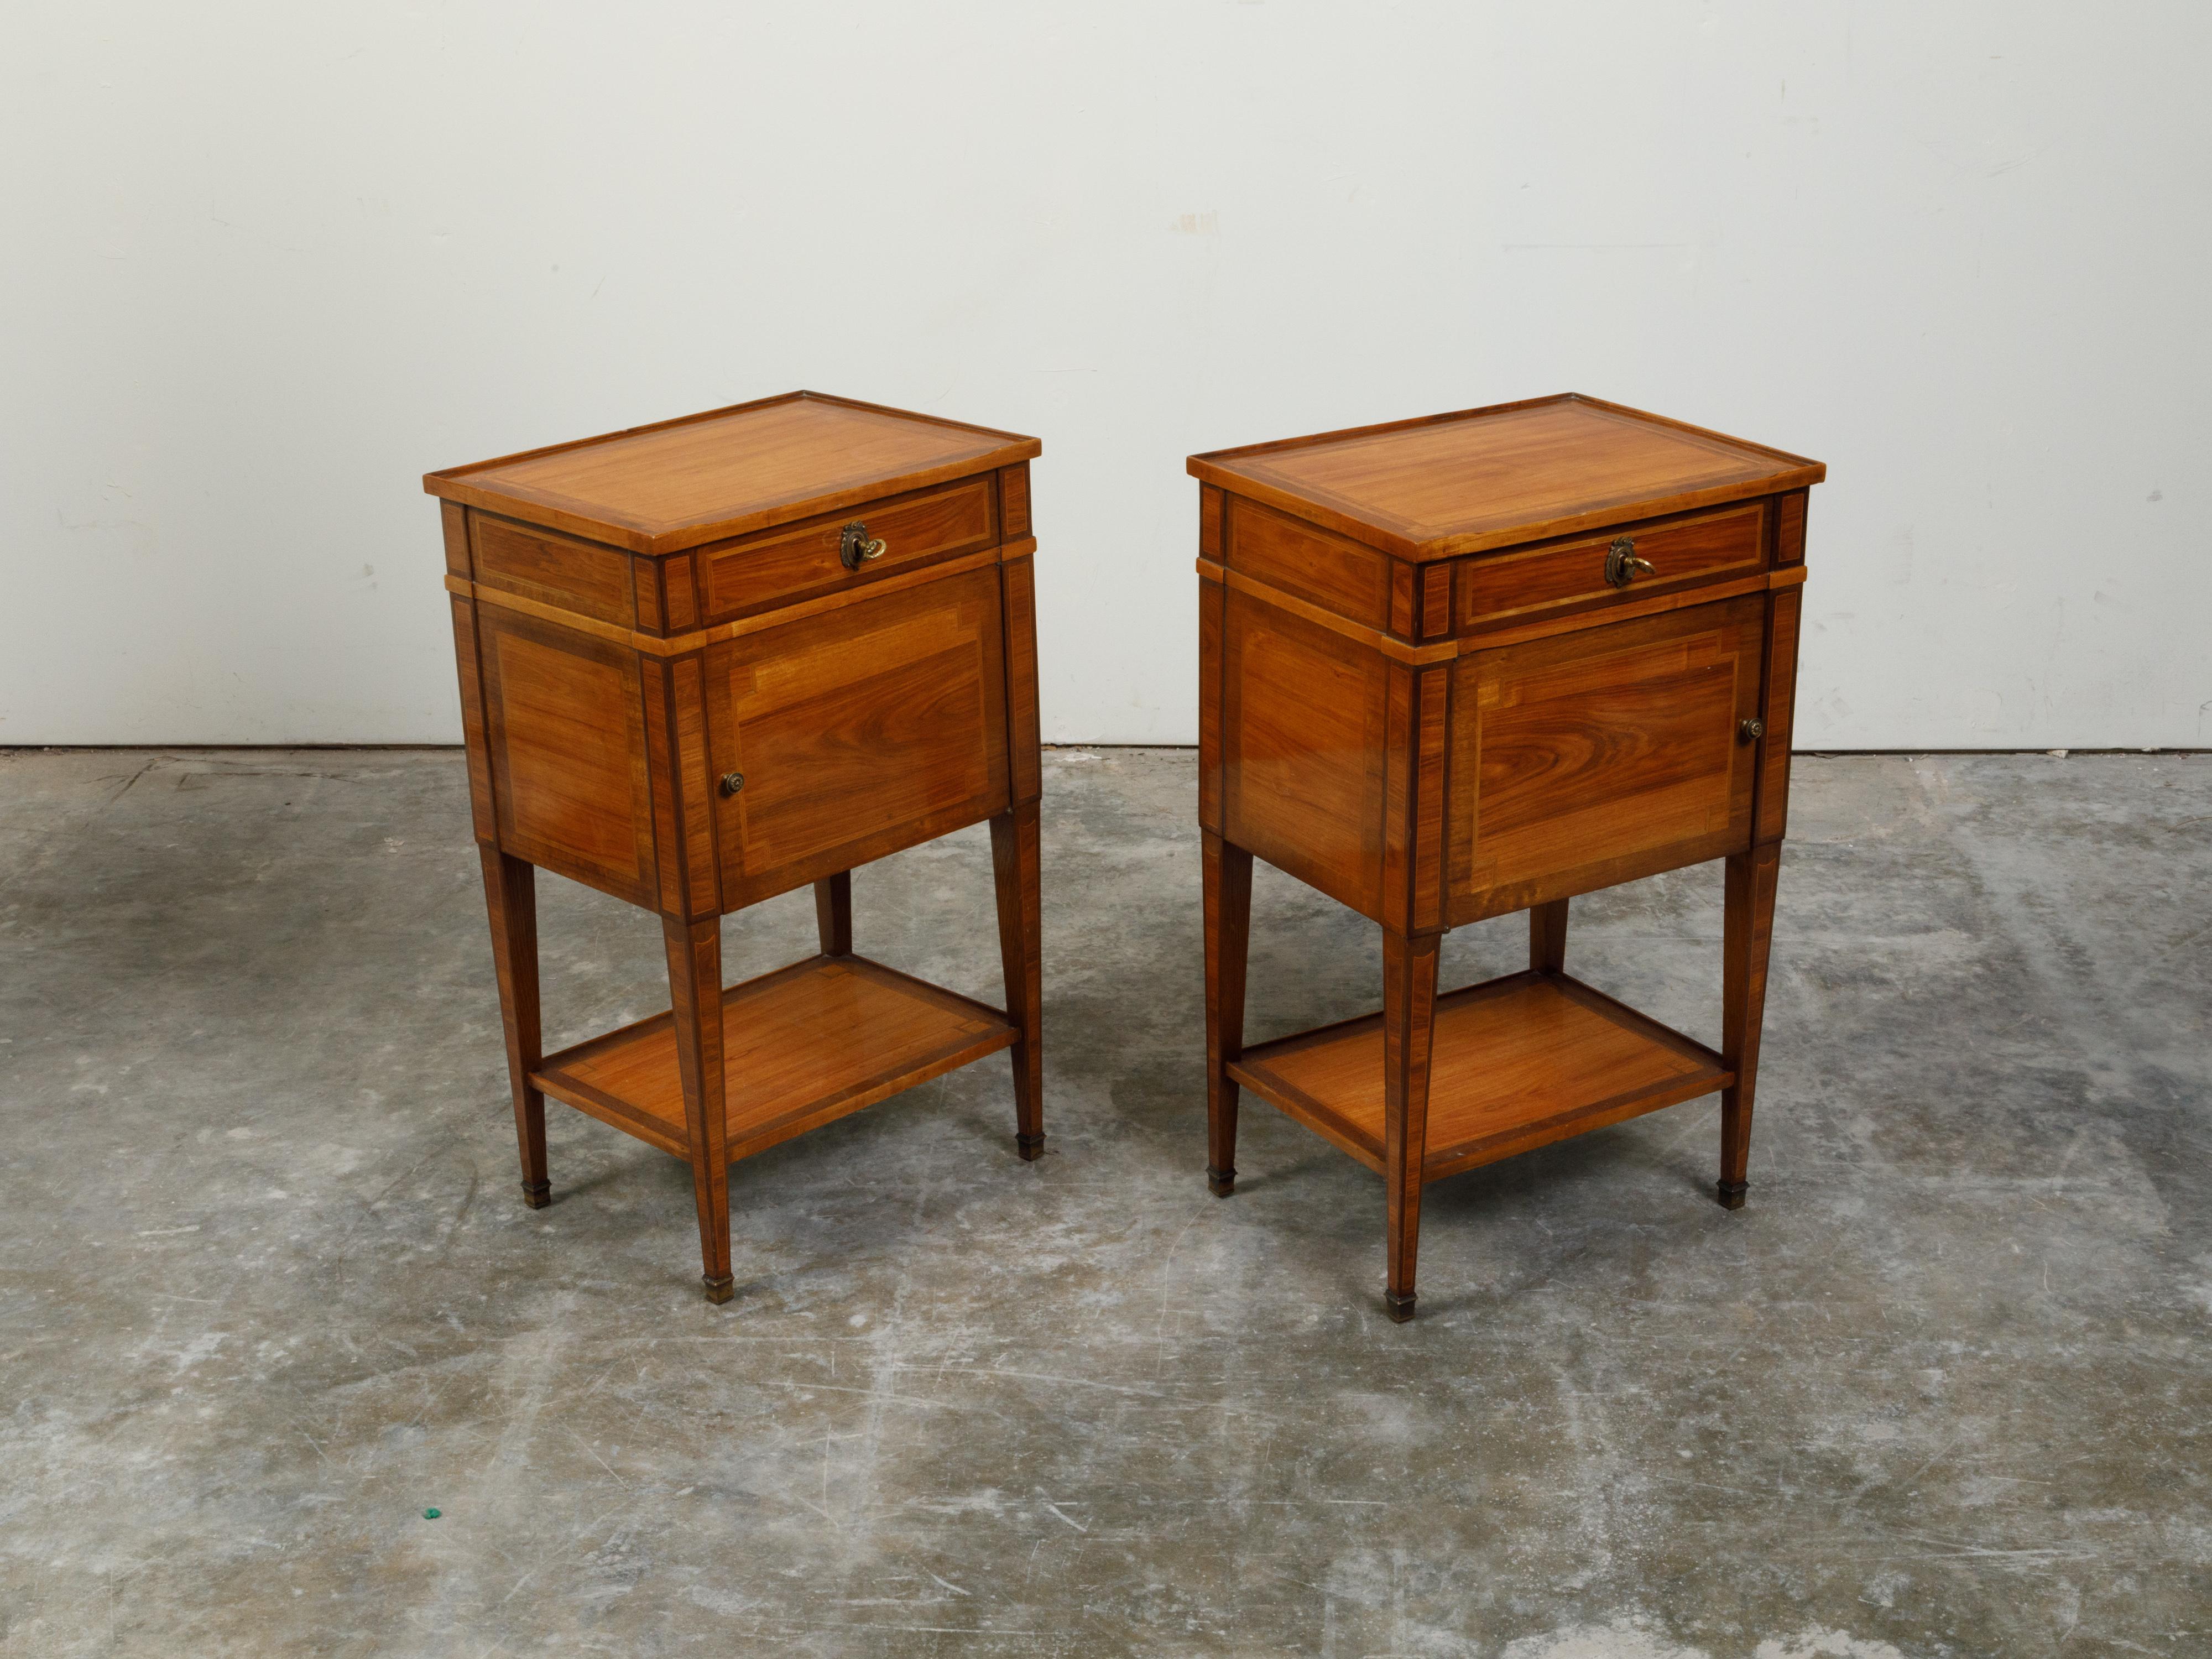 Pair of French Paul Sormani Late 19th Century Bedside Tables with Inlay In Good Condition For Sale In Atlanta, GA